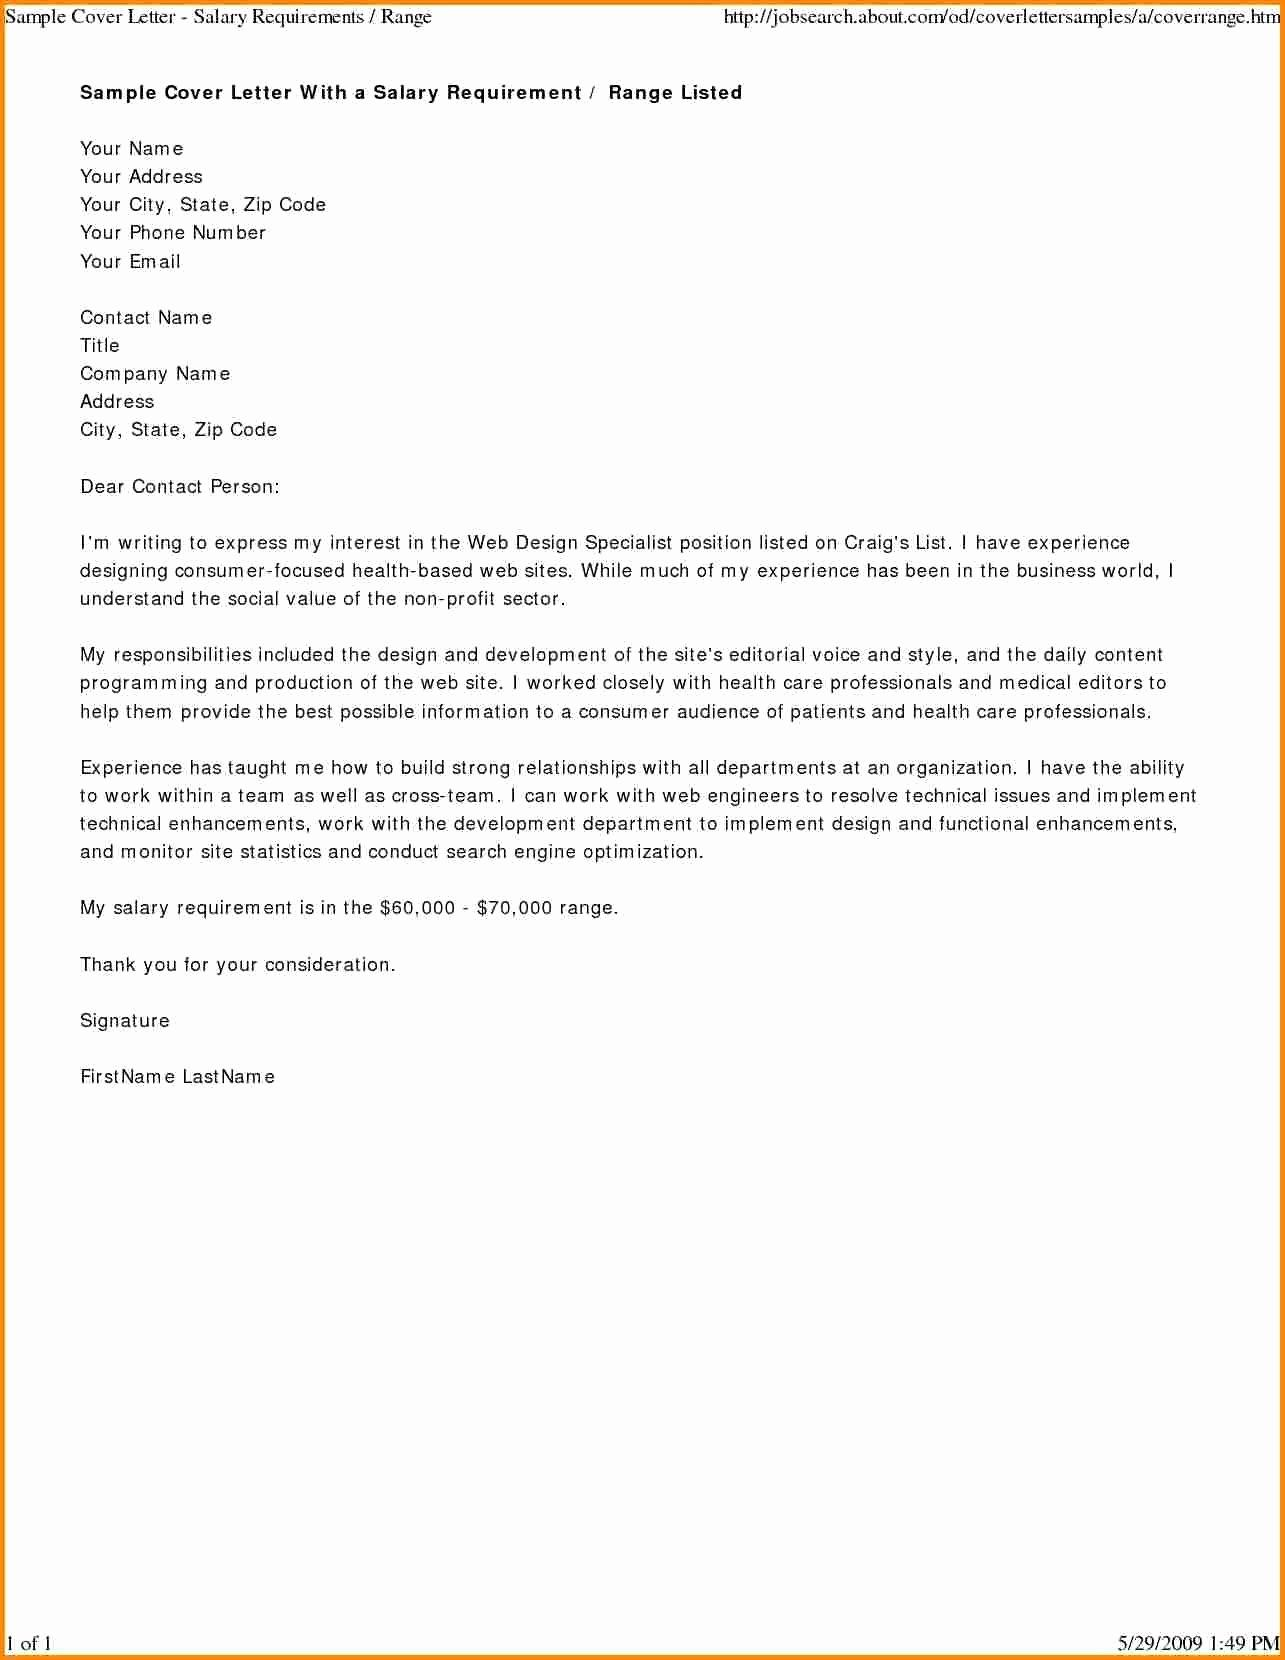 General Cover Letter Template - 28 New General Cover Letter Sample Resume Templates Resume Templates